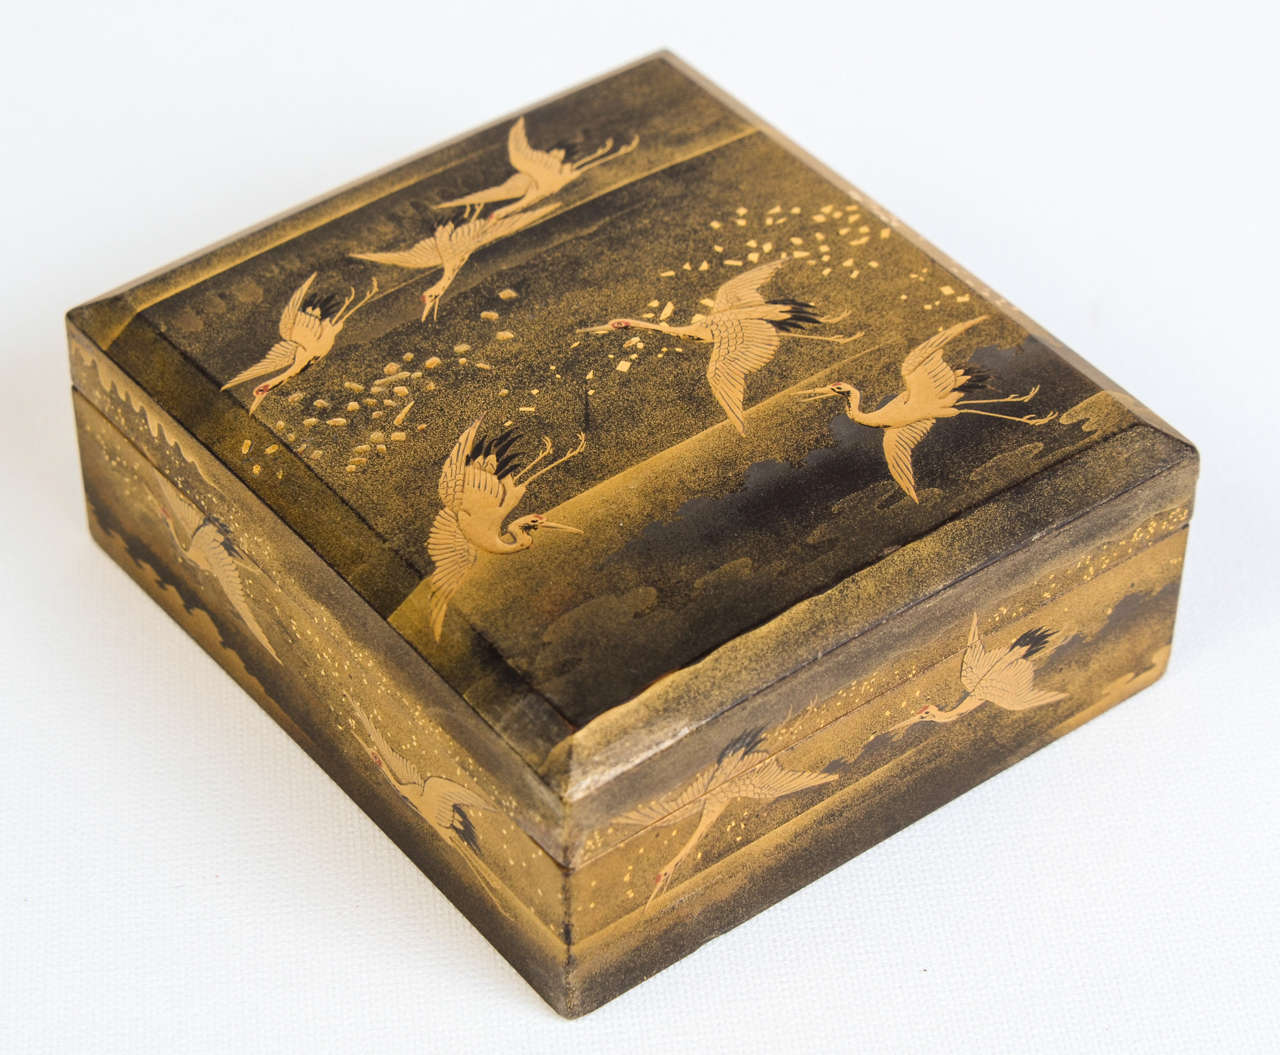 Beautiful small gilded lacquered box with a decor of cranes flying in a cloudy landscape. Nashi-ji lacquer inside.